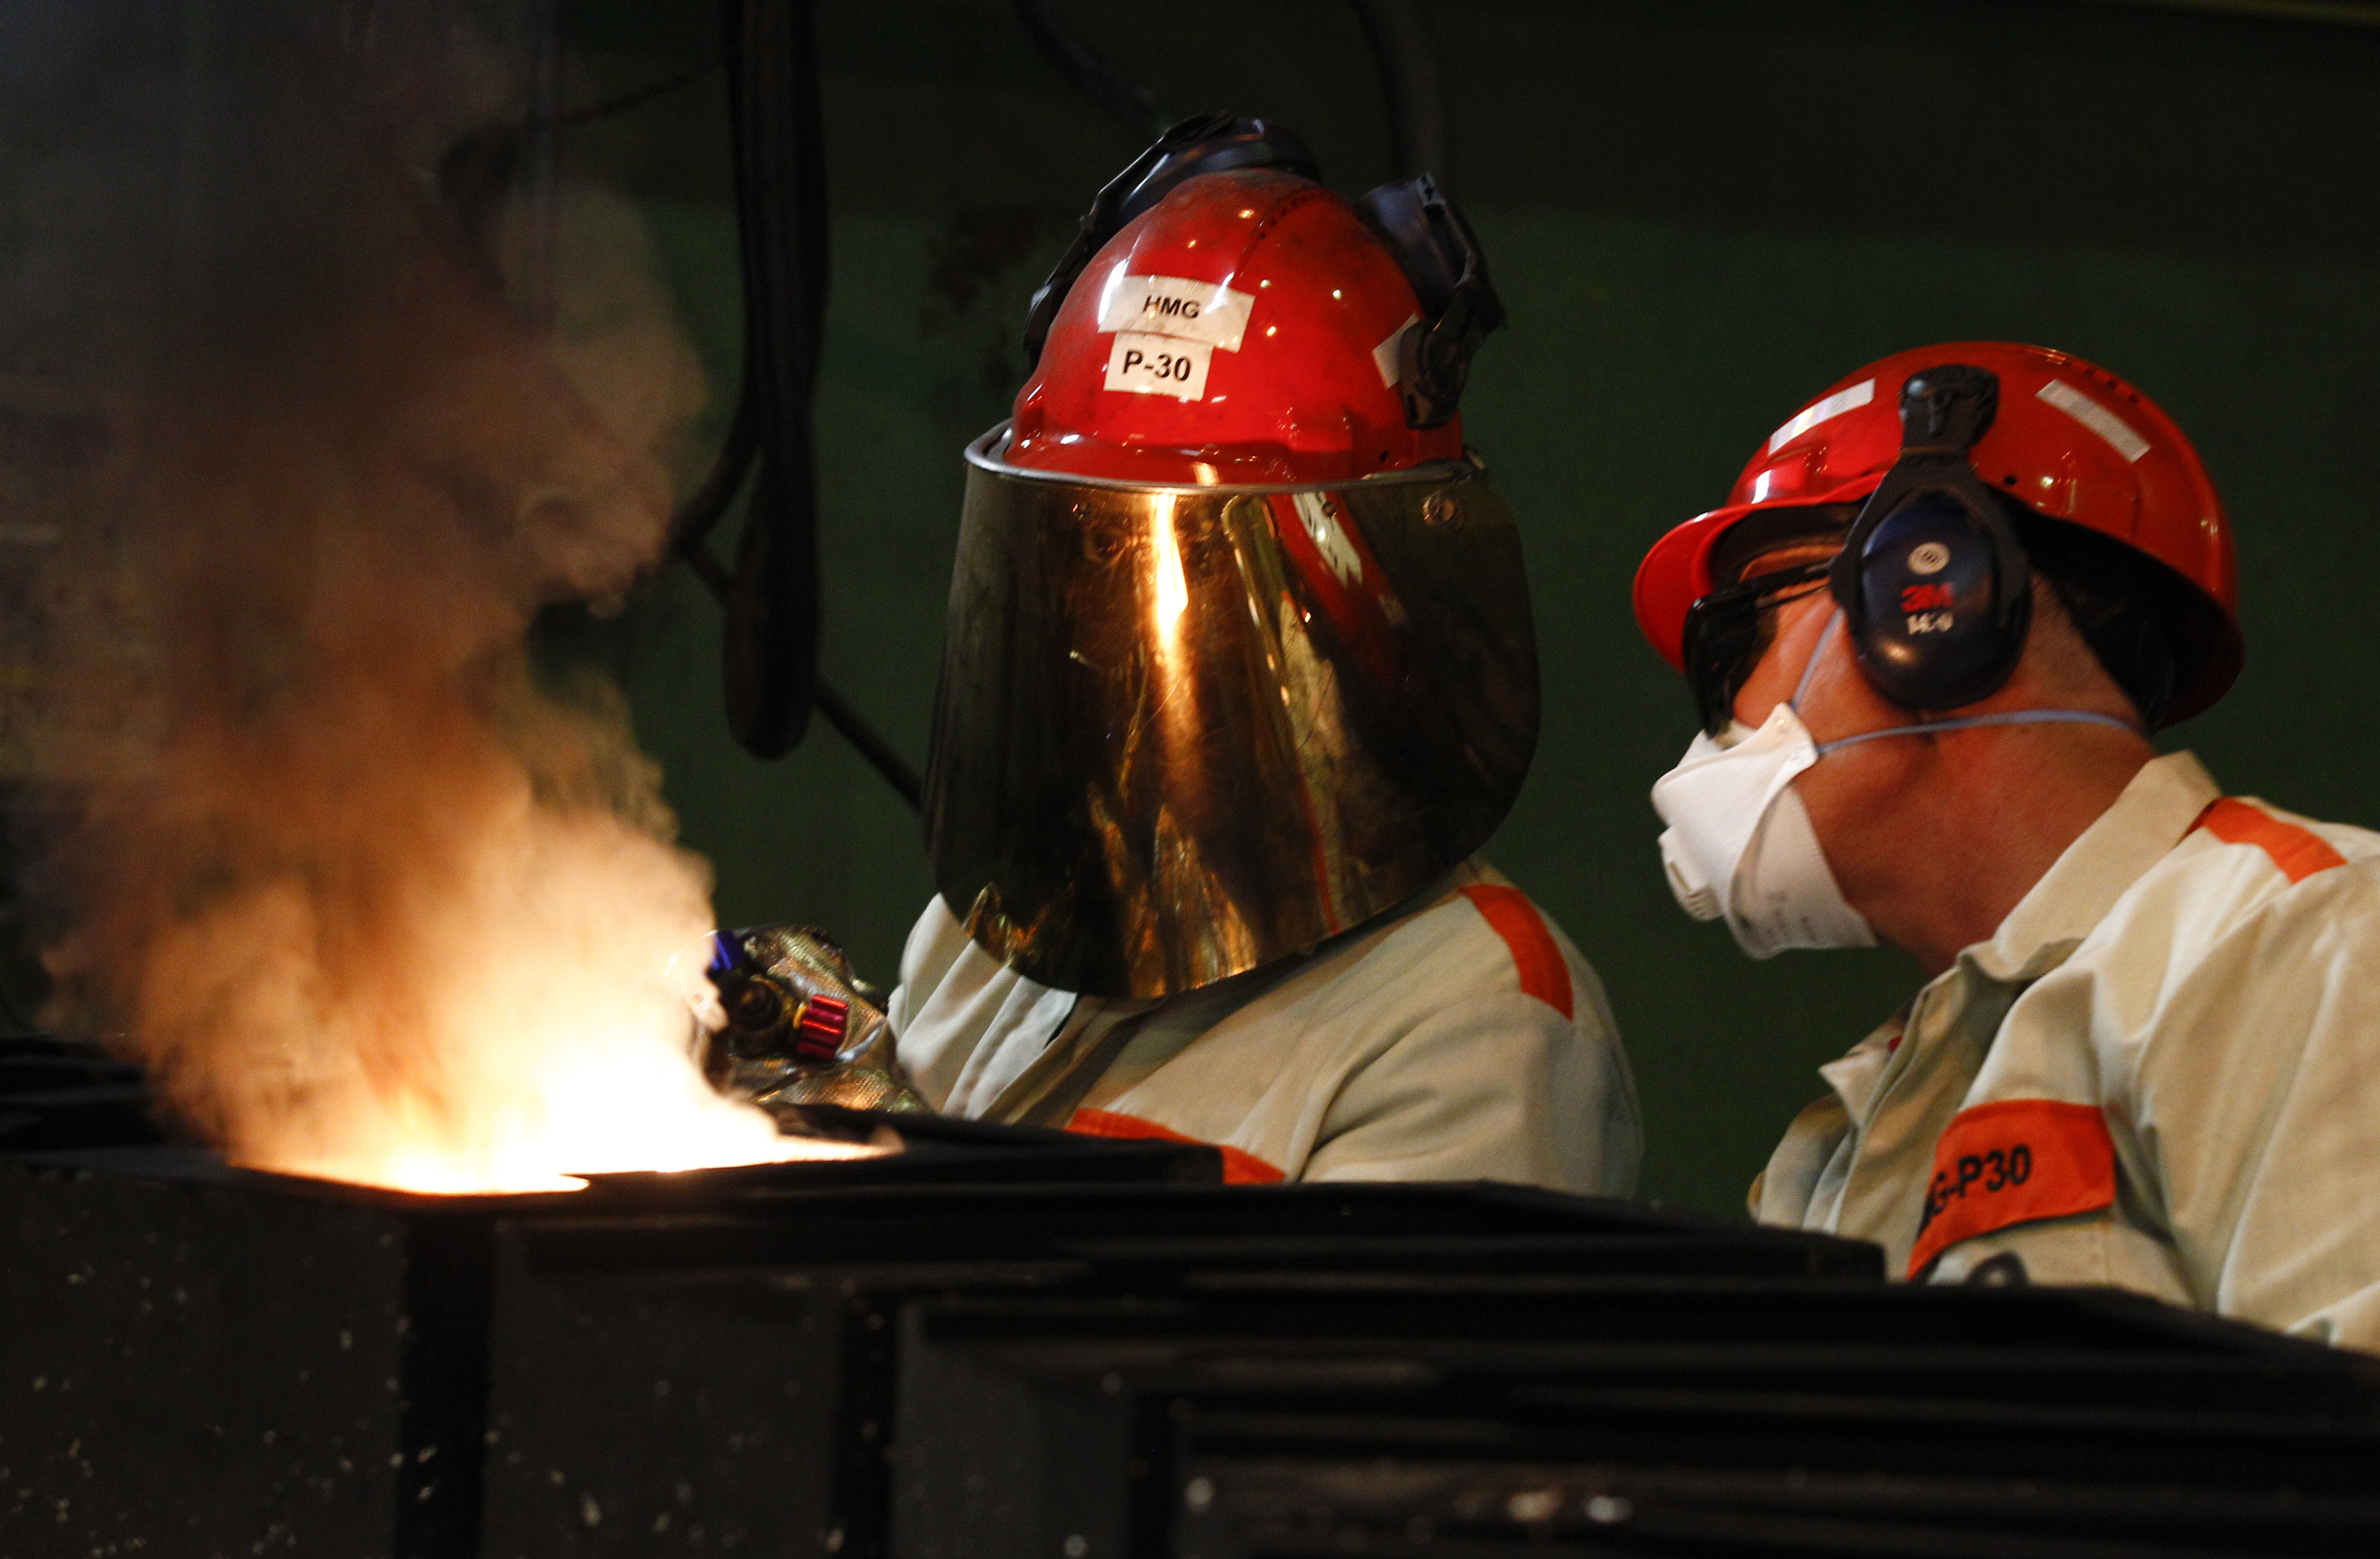 Workers prepare to pour molten silver into moulds at the KGHM copper and precious metals smelter processing plant in Glogow